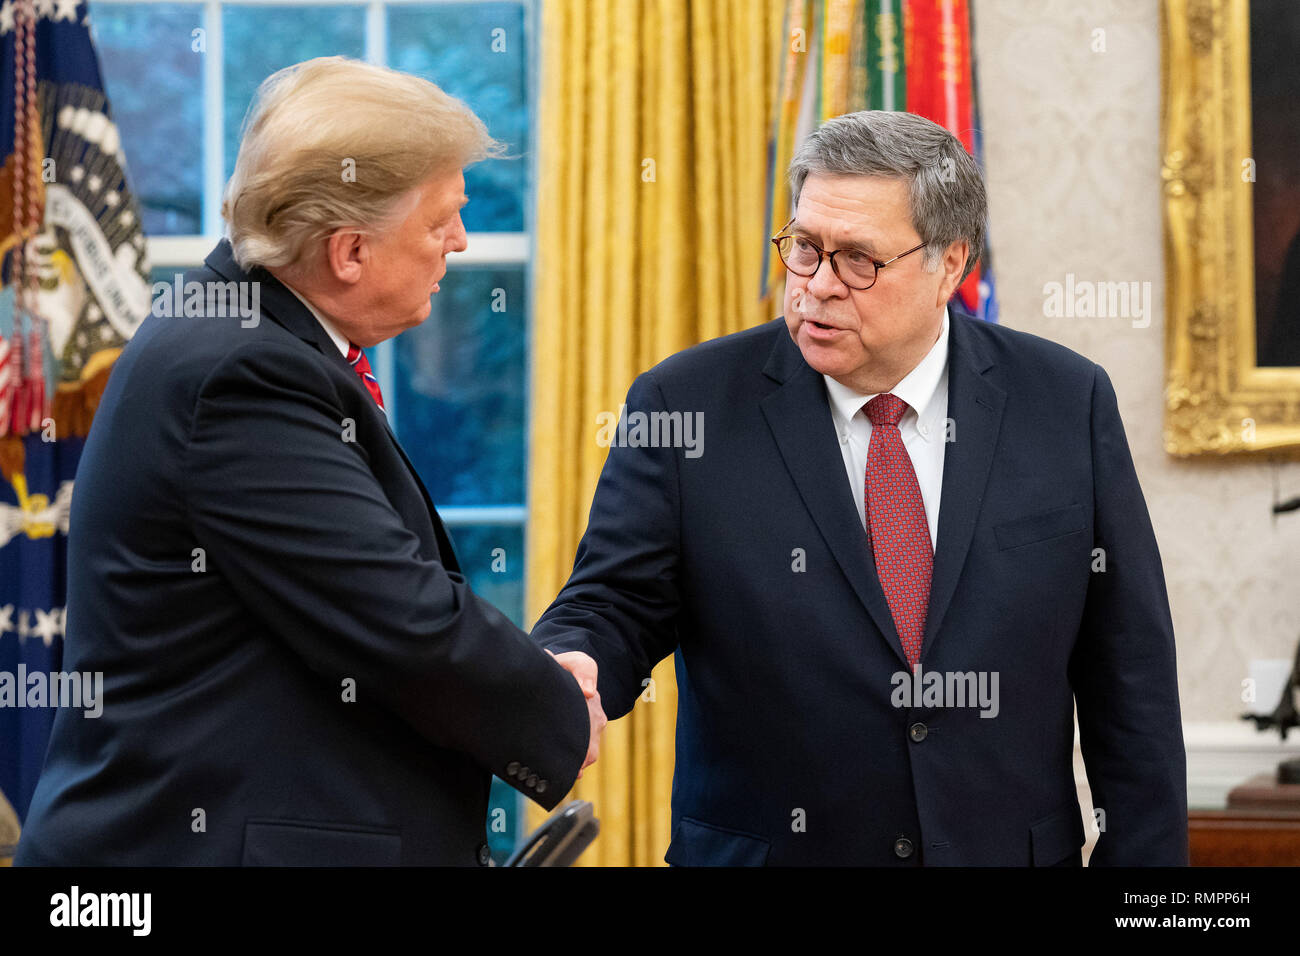 President Donald J. Trump shakes hands with William P. Barr in the Oval Office of the White House Thursday, Feb. 14, 2019, after Barr was sworn-in as the new United States Attorney General.  People:  President Donald Trump,  William P. Barr Stock Photo